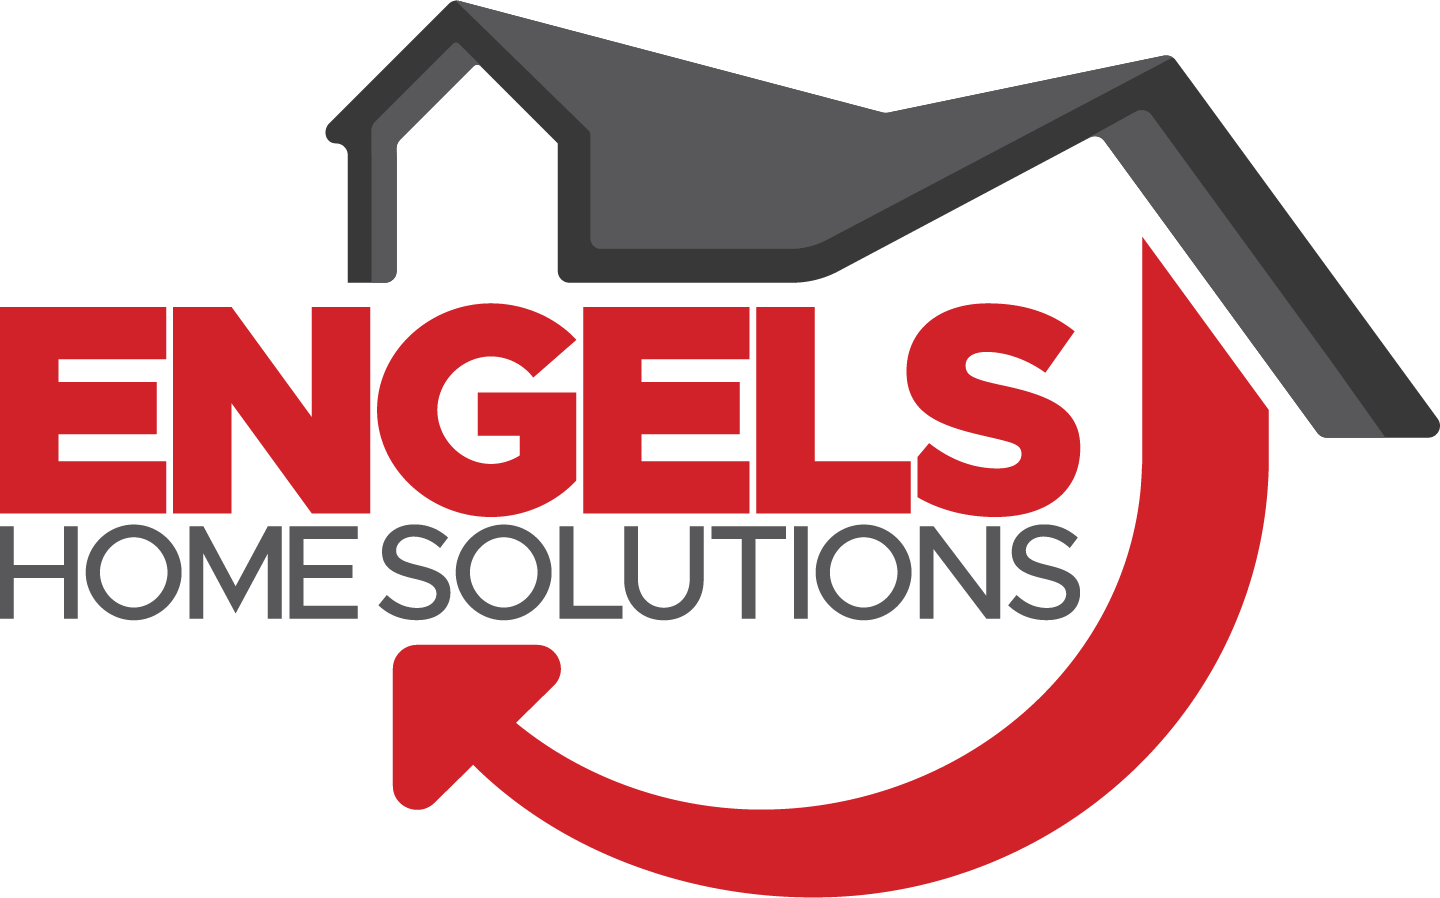 Engels Home Services